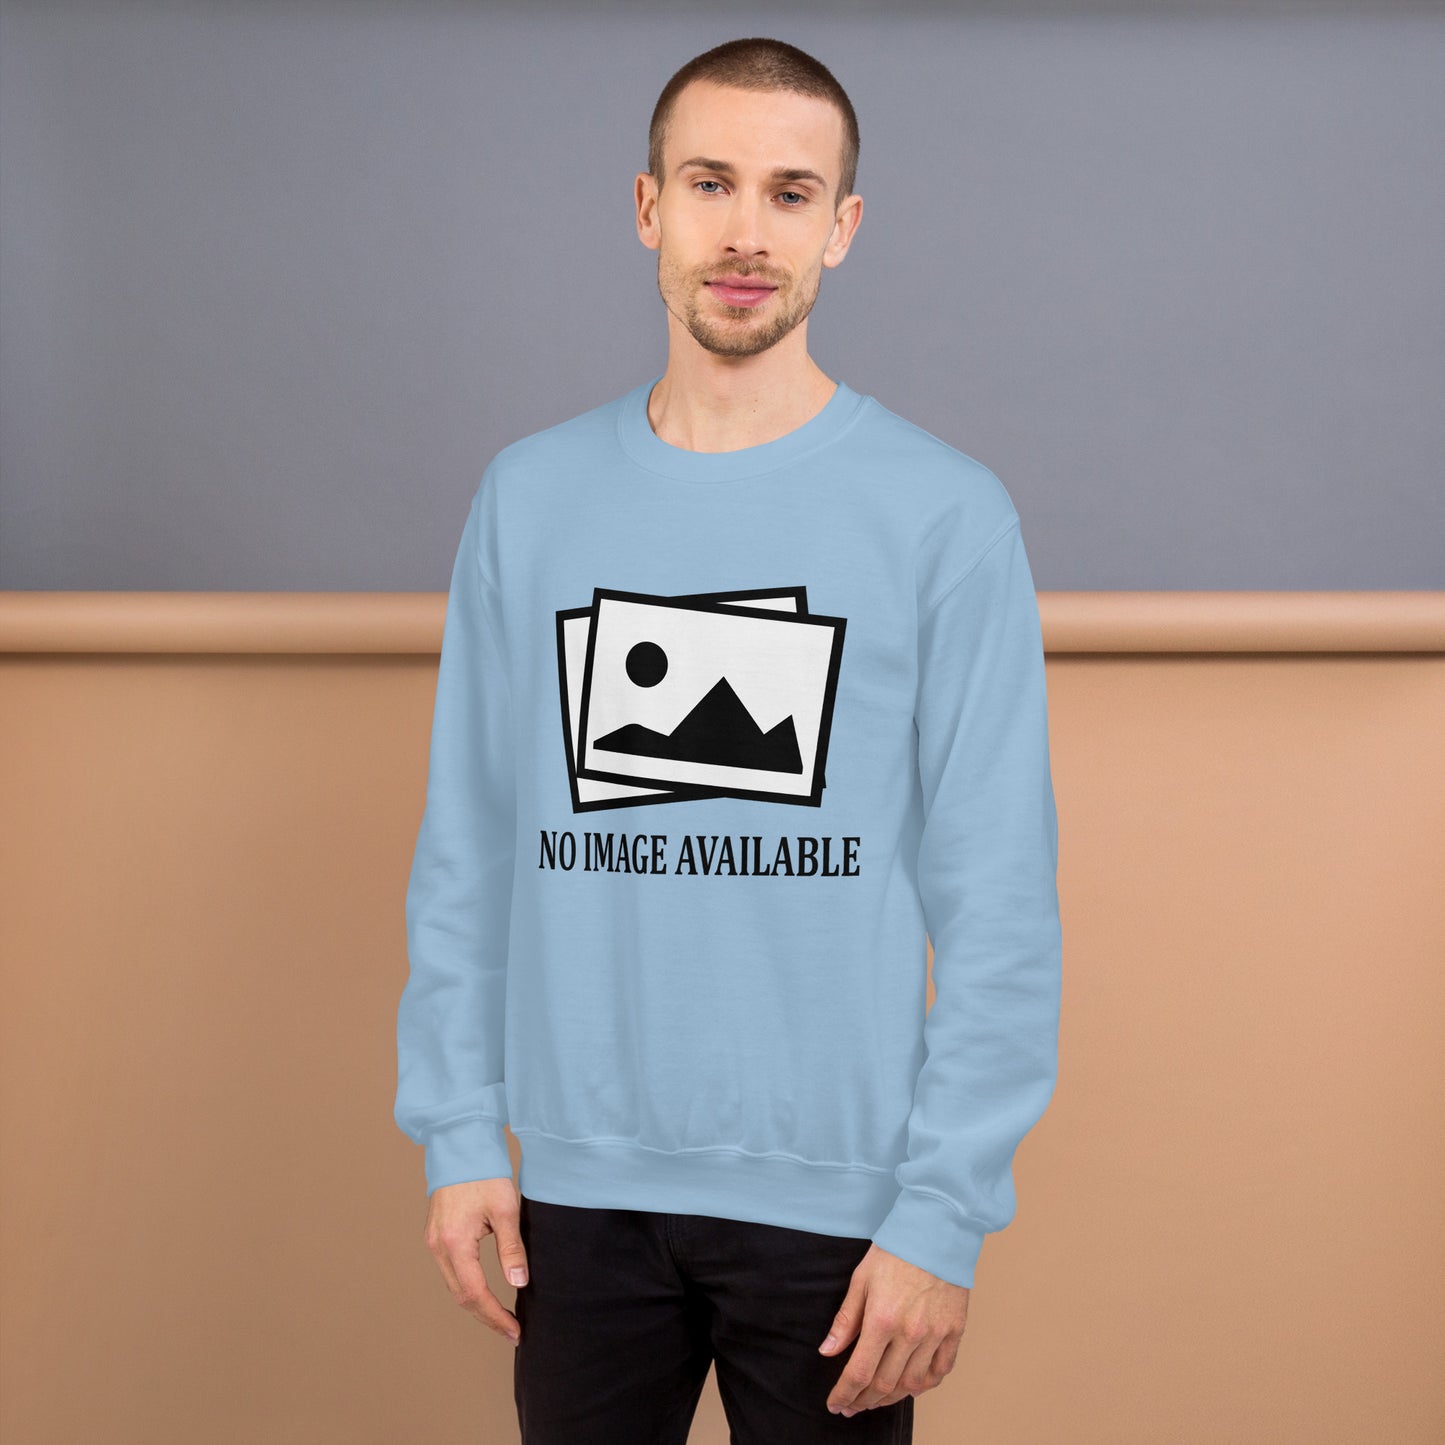 Men with light blue sweatshirt with image and text "no image available"